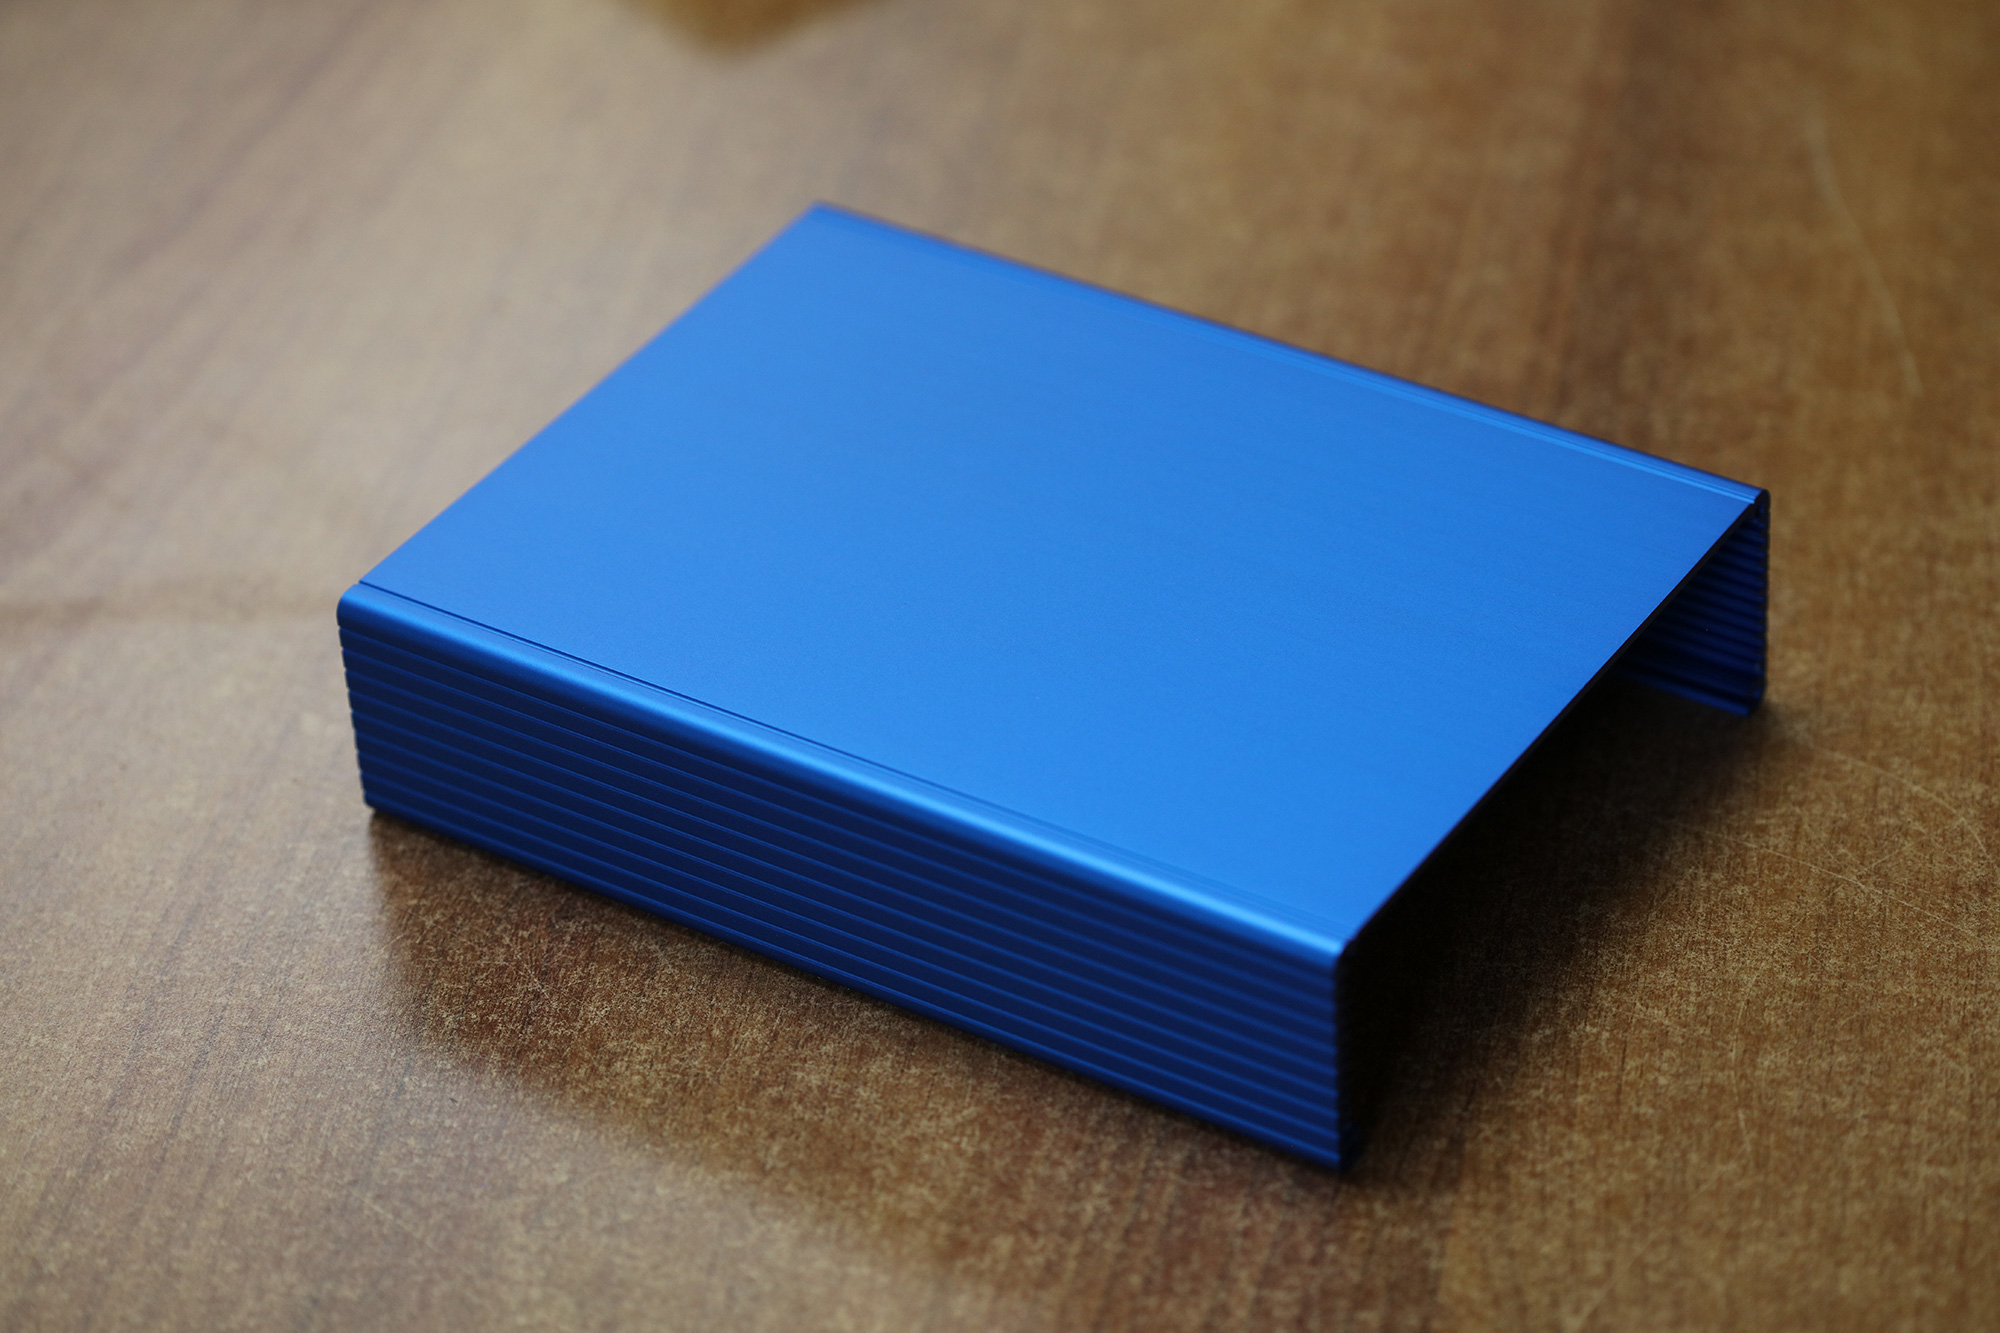 close up of an anodized product with a blue finish